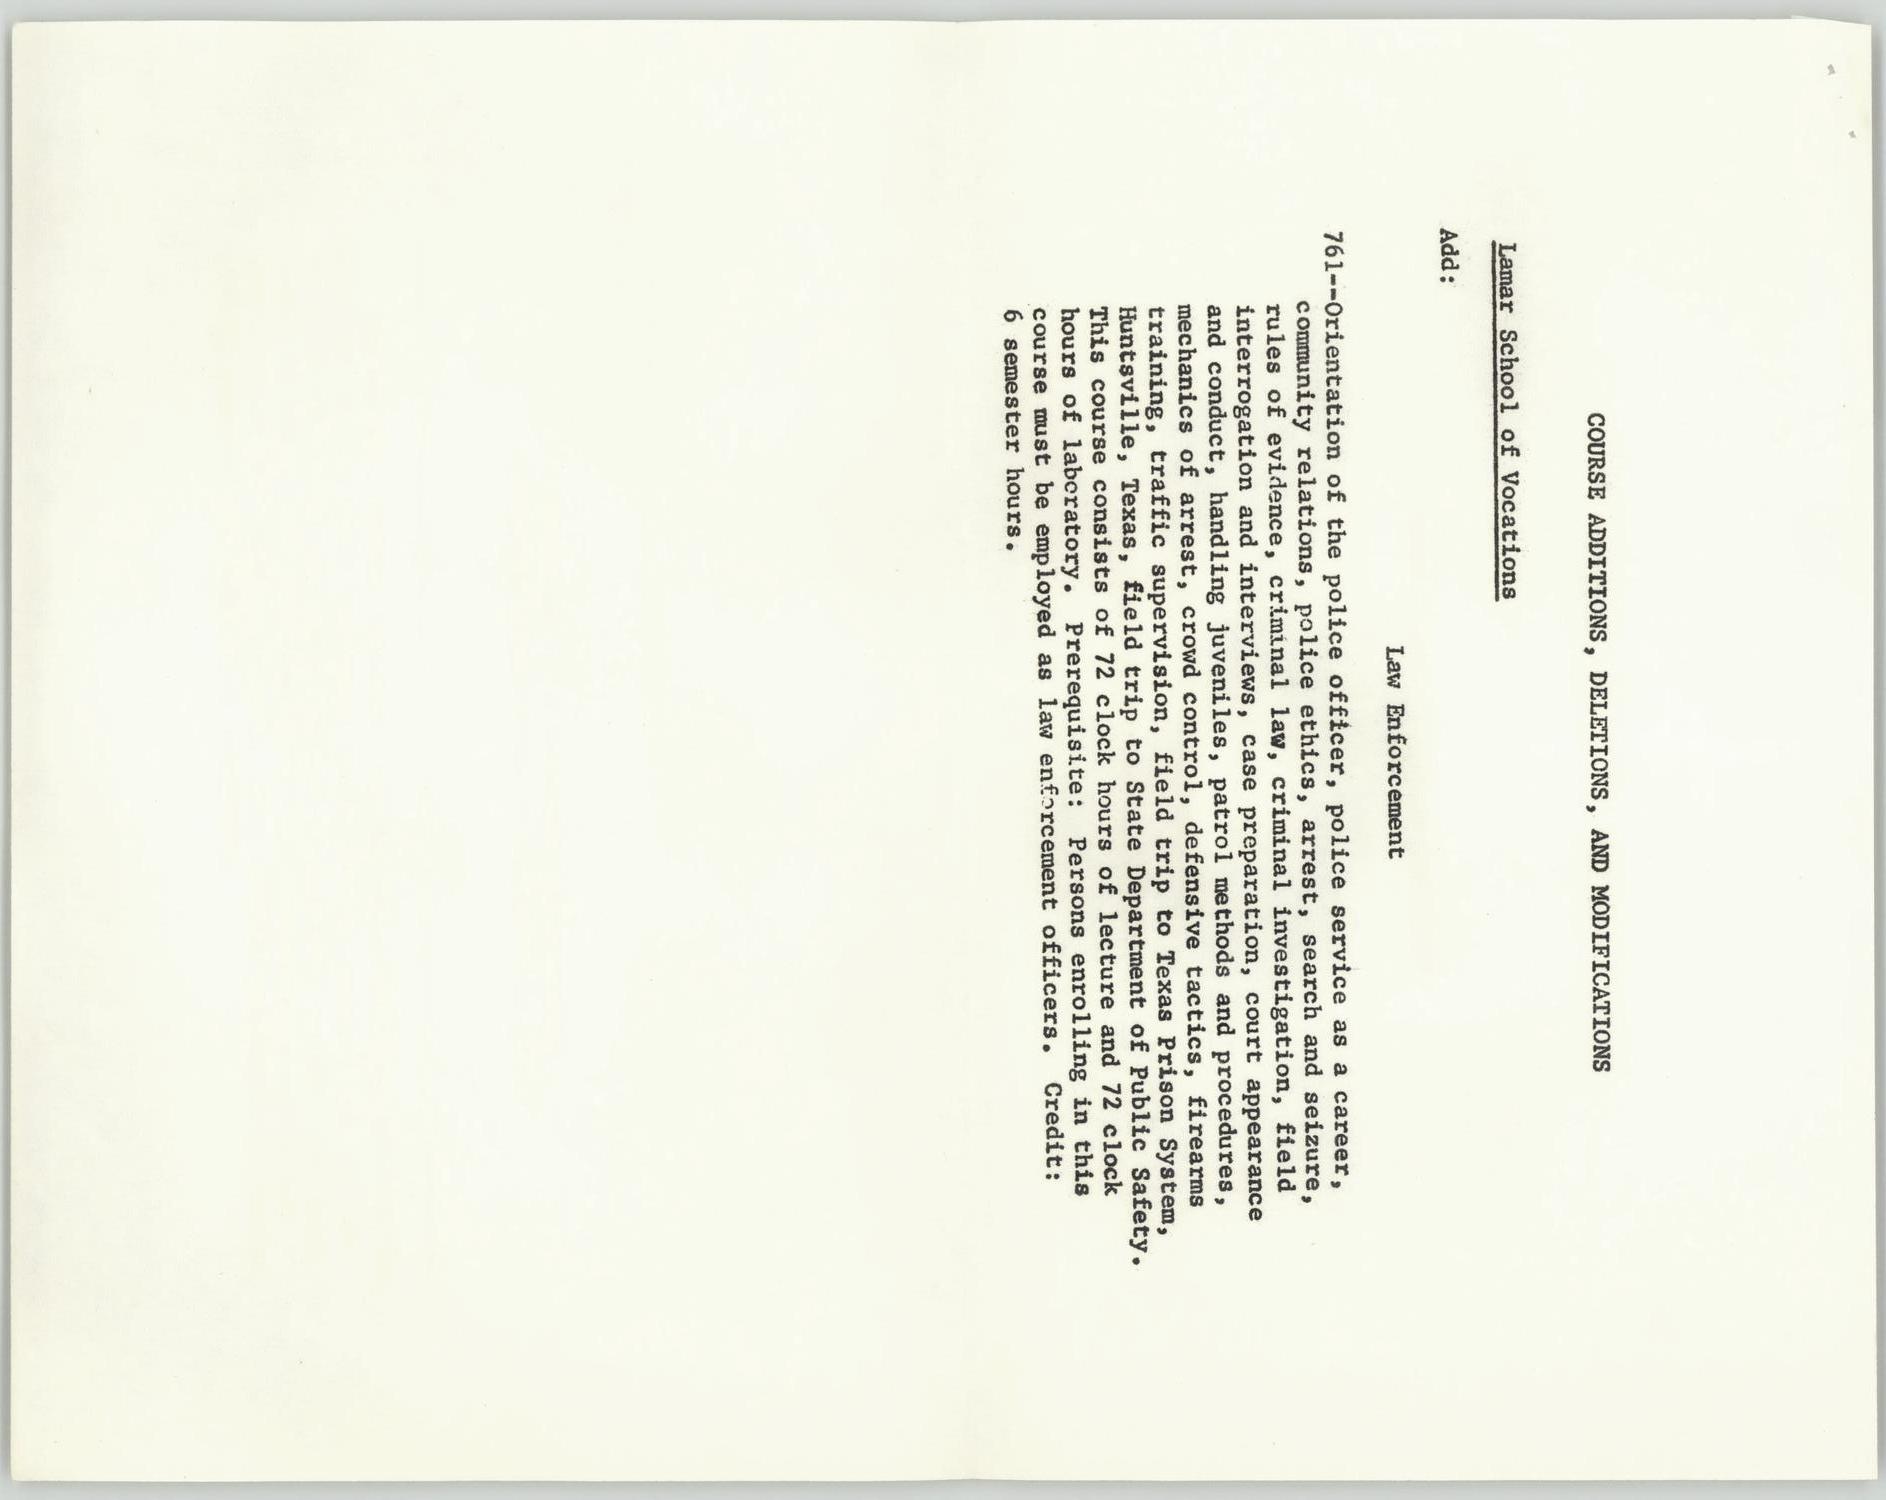 Catalog of Lamar State College of Technology School of Vocations, 1967-1968, Supplement #3
                                                
                                                    [Sequence #]: 3 of 4
                                                